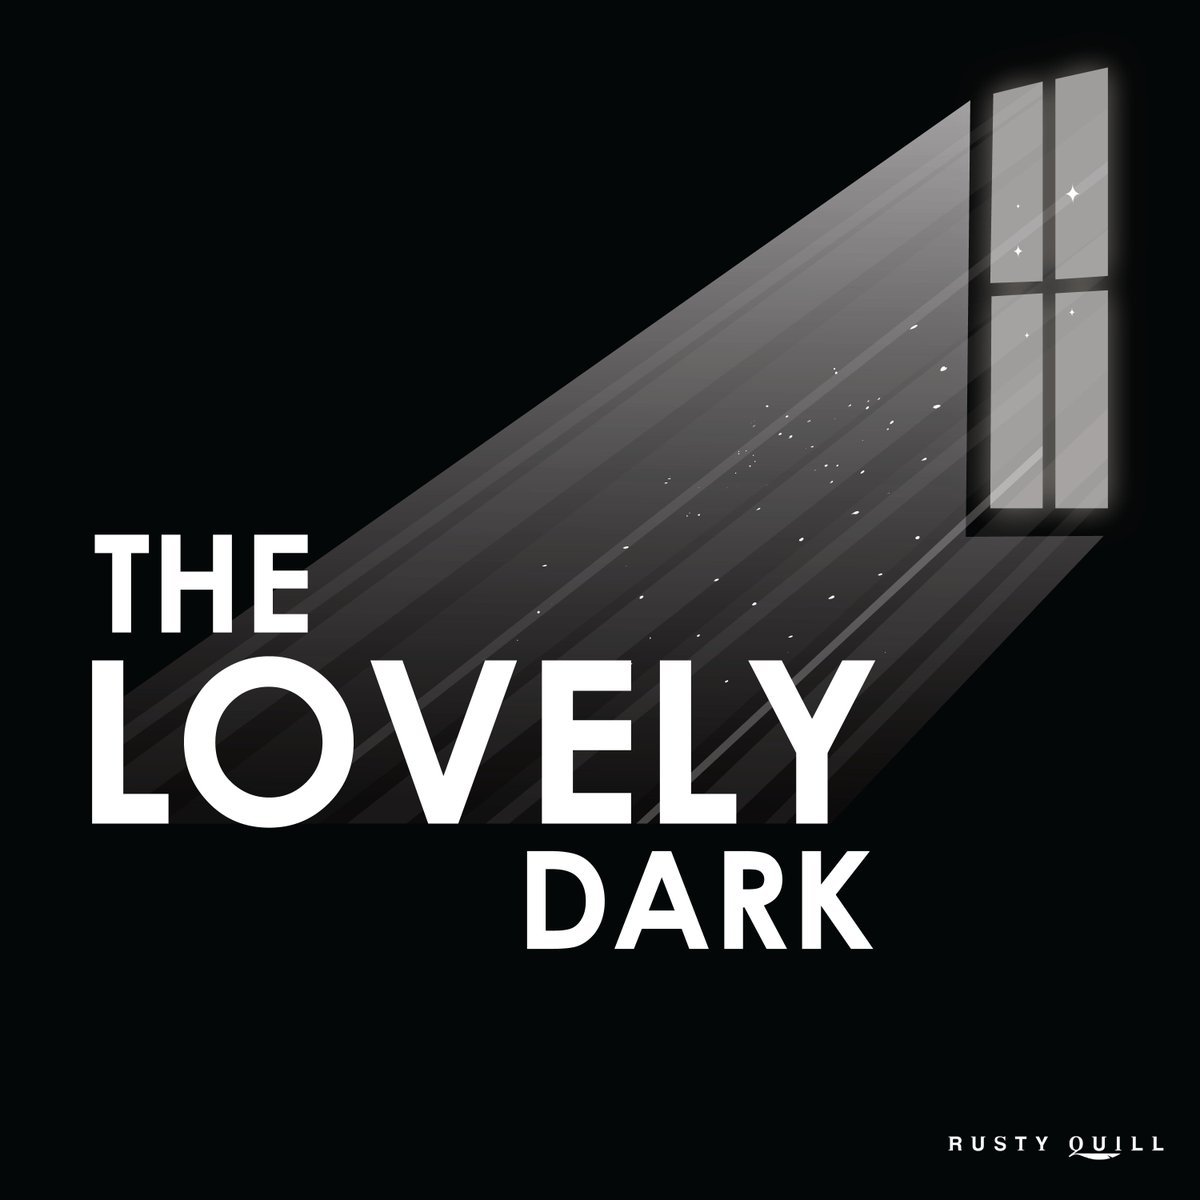 Today, we're delighted to welcome @TheLovelyDark to the #RQNetwork! A fiction podcast about how darkness in our lives may reveal a path to love and light, The Lovely Dark features award-winning writers and remarkable performers. Find out more: rustyquill.com/show/the-lovel…